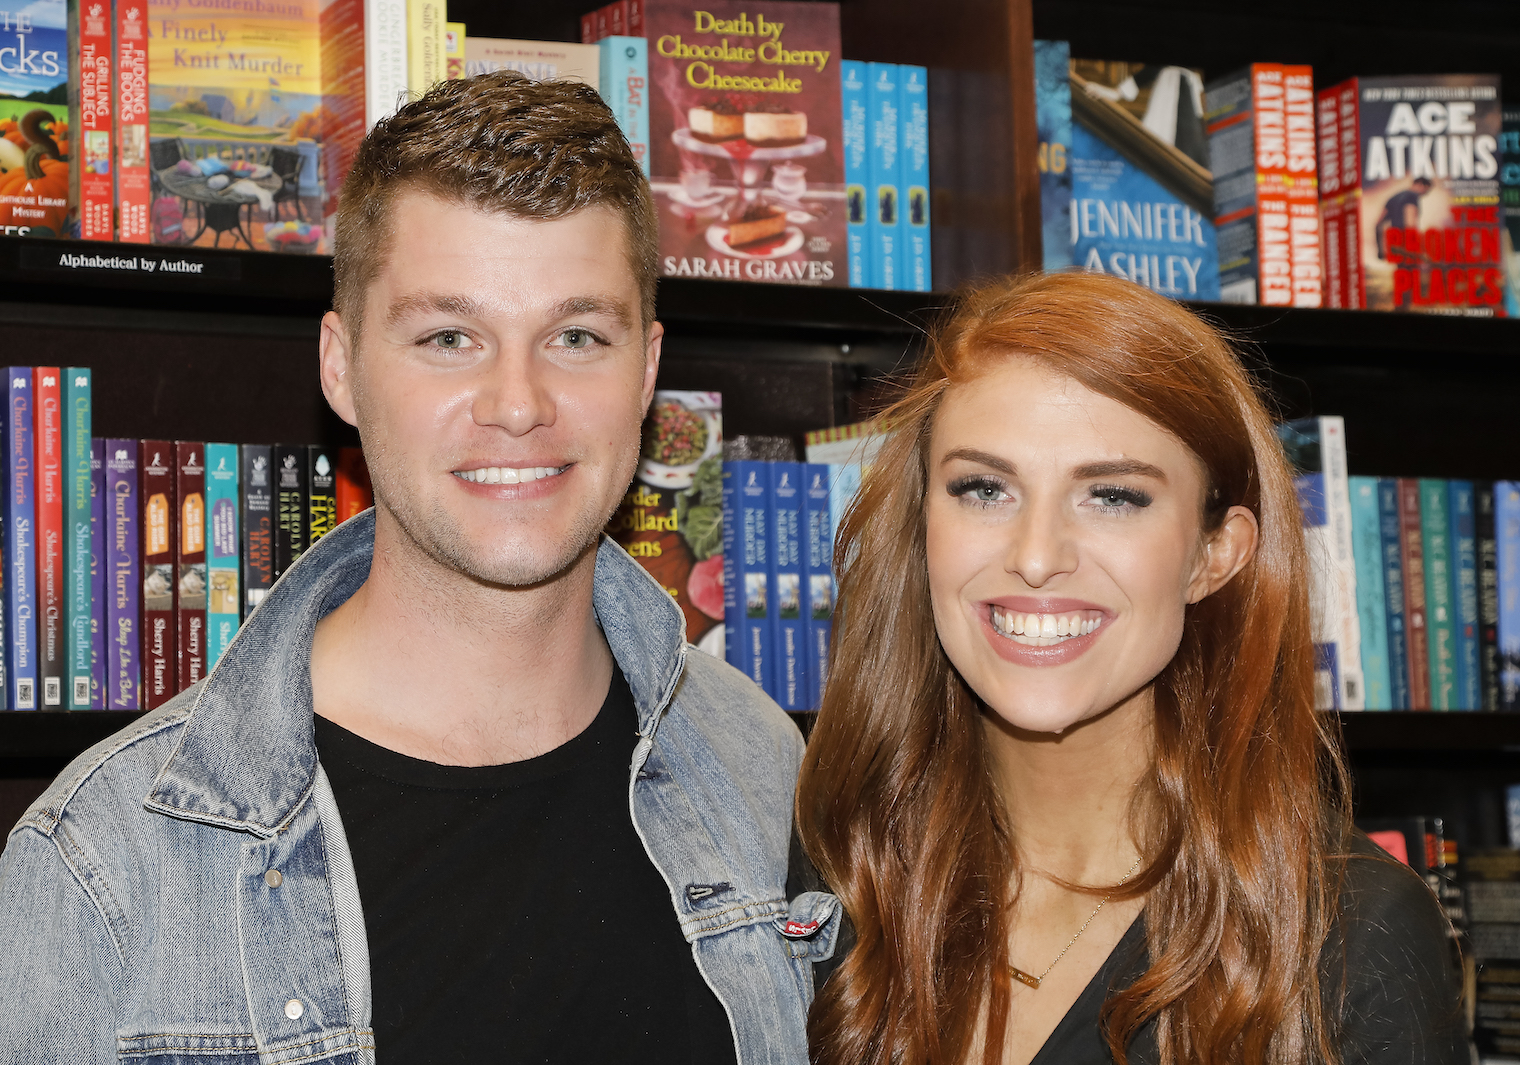 Jeremy and Audrey Roloff from 'Little People, Big World' smiling together with a bookshelf behind them